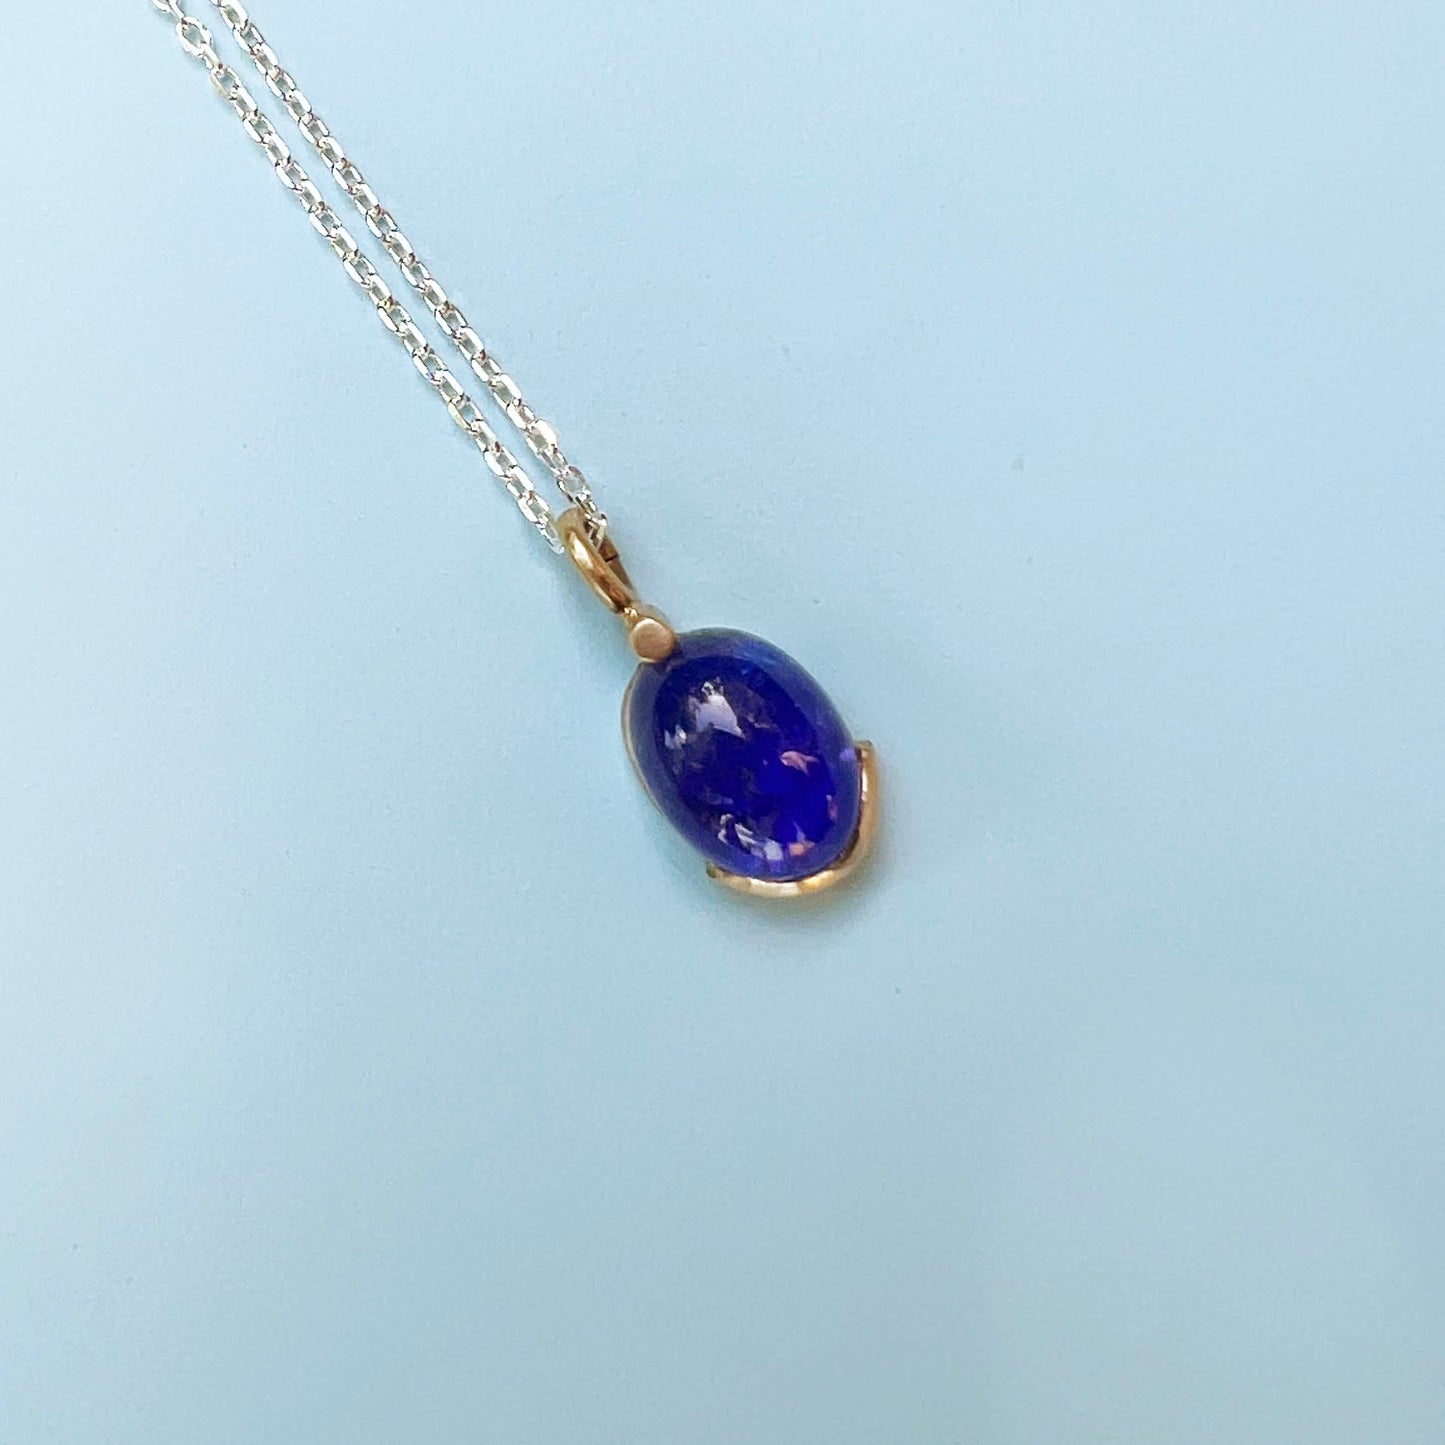 unique jewellery, handmade jewellery, 18ct gold & tanzanite necklace, 18ct gold necklace, sterling silver chain, tanzanite pendant, tanzanite necklace, gemstone necklace